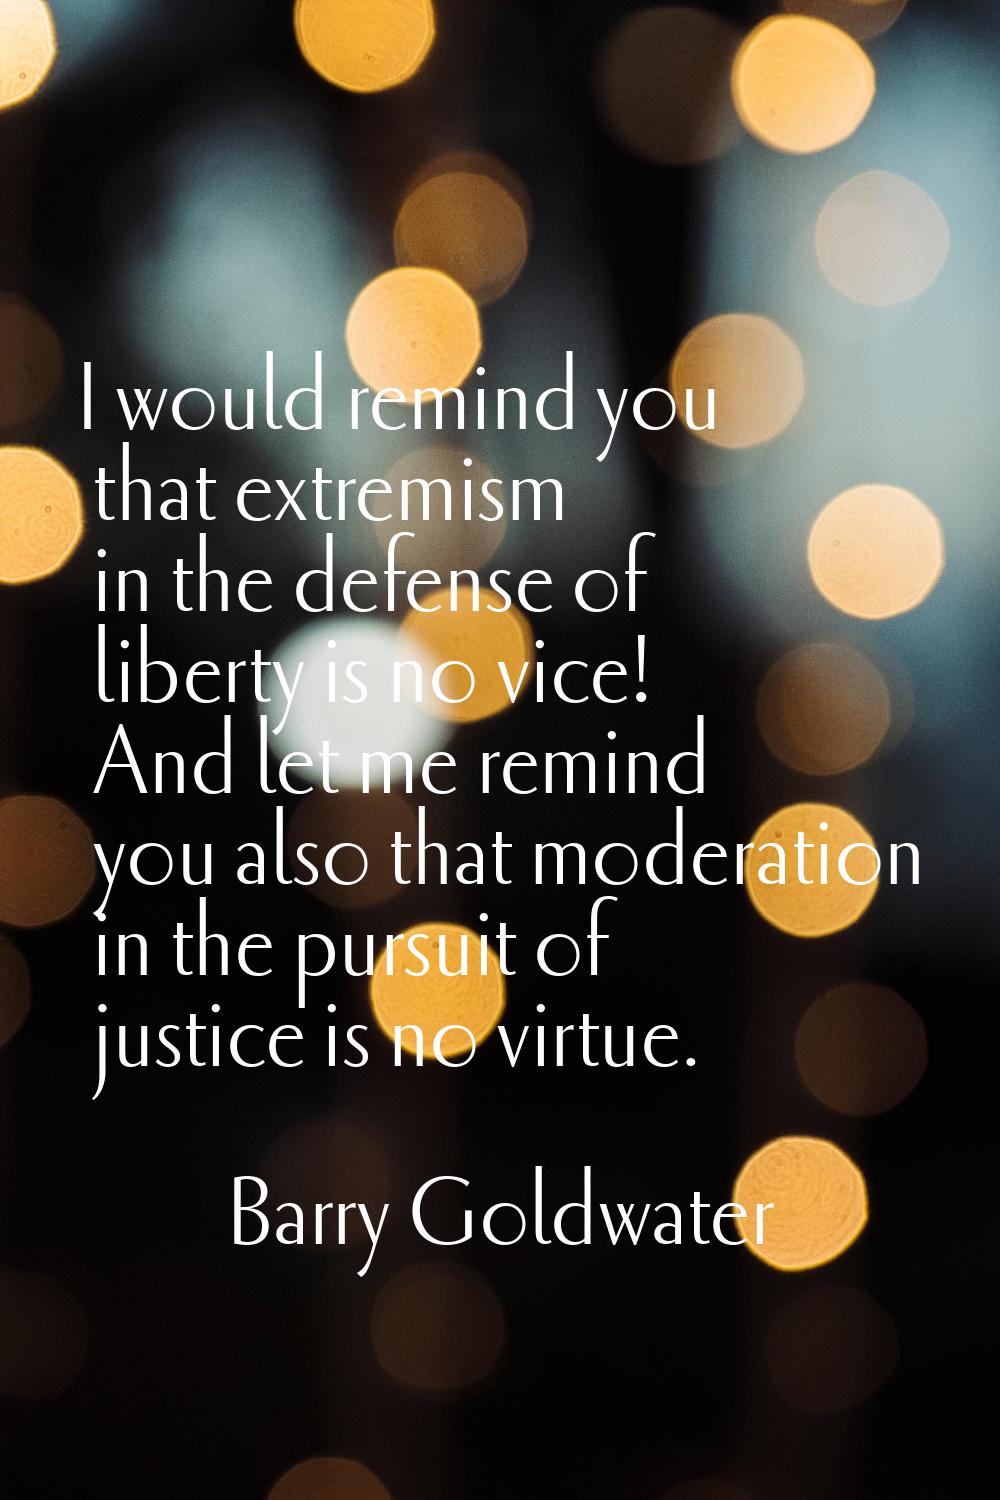 I would remind you that extremism in the defense of liberty is no vice! And let me remind you also 